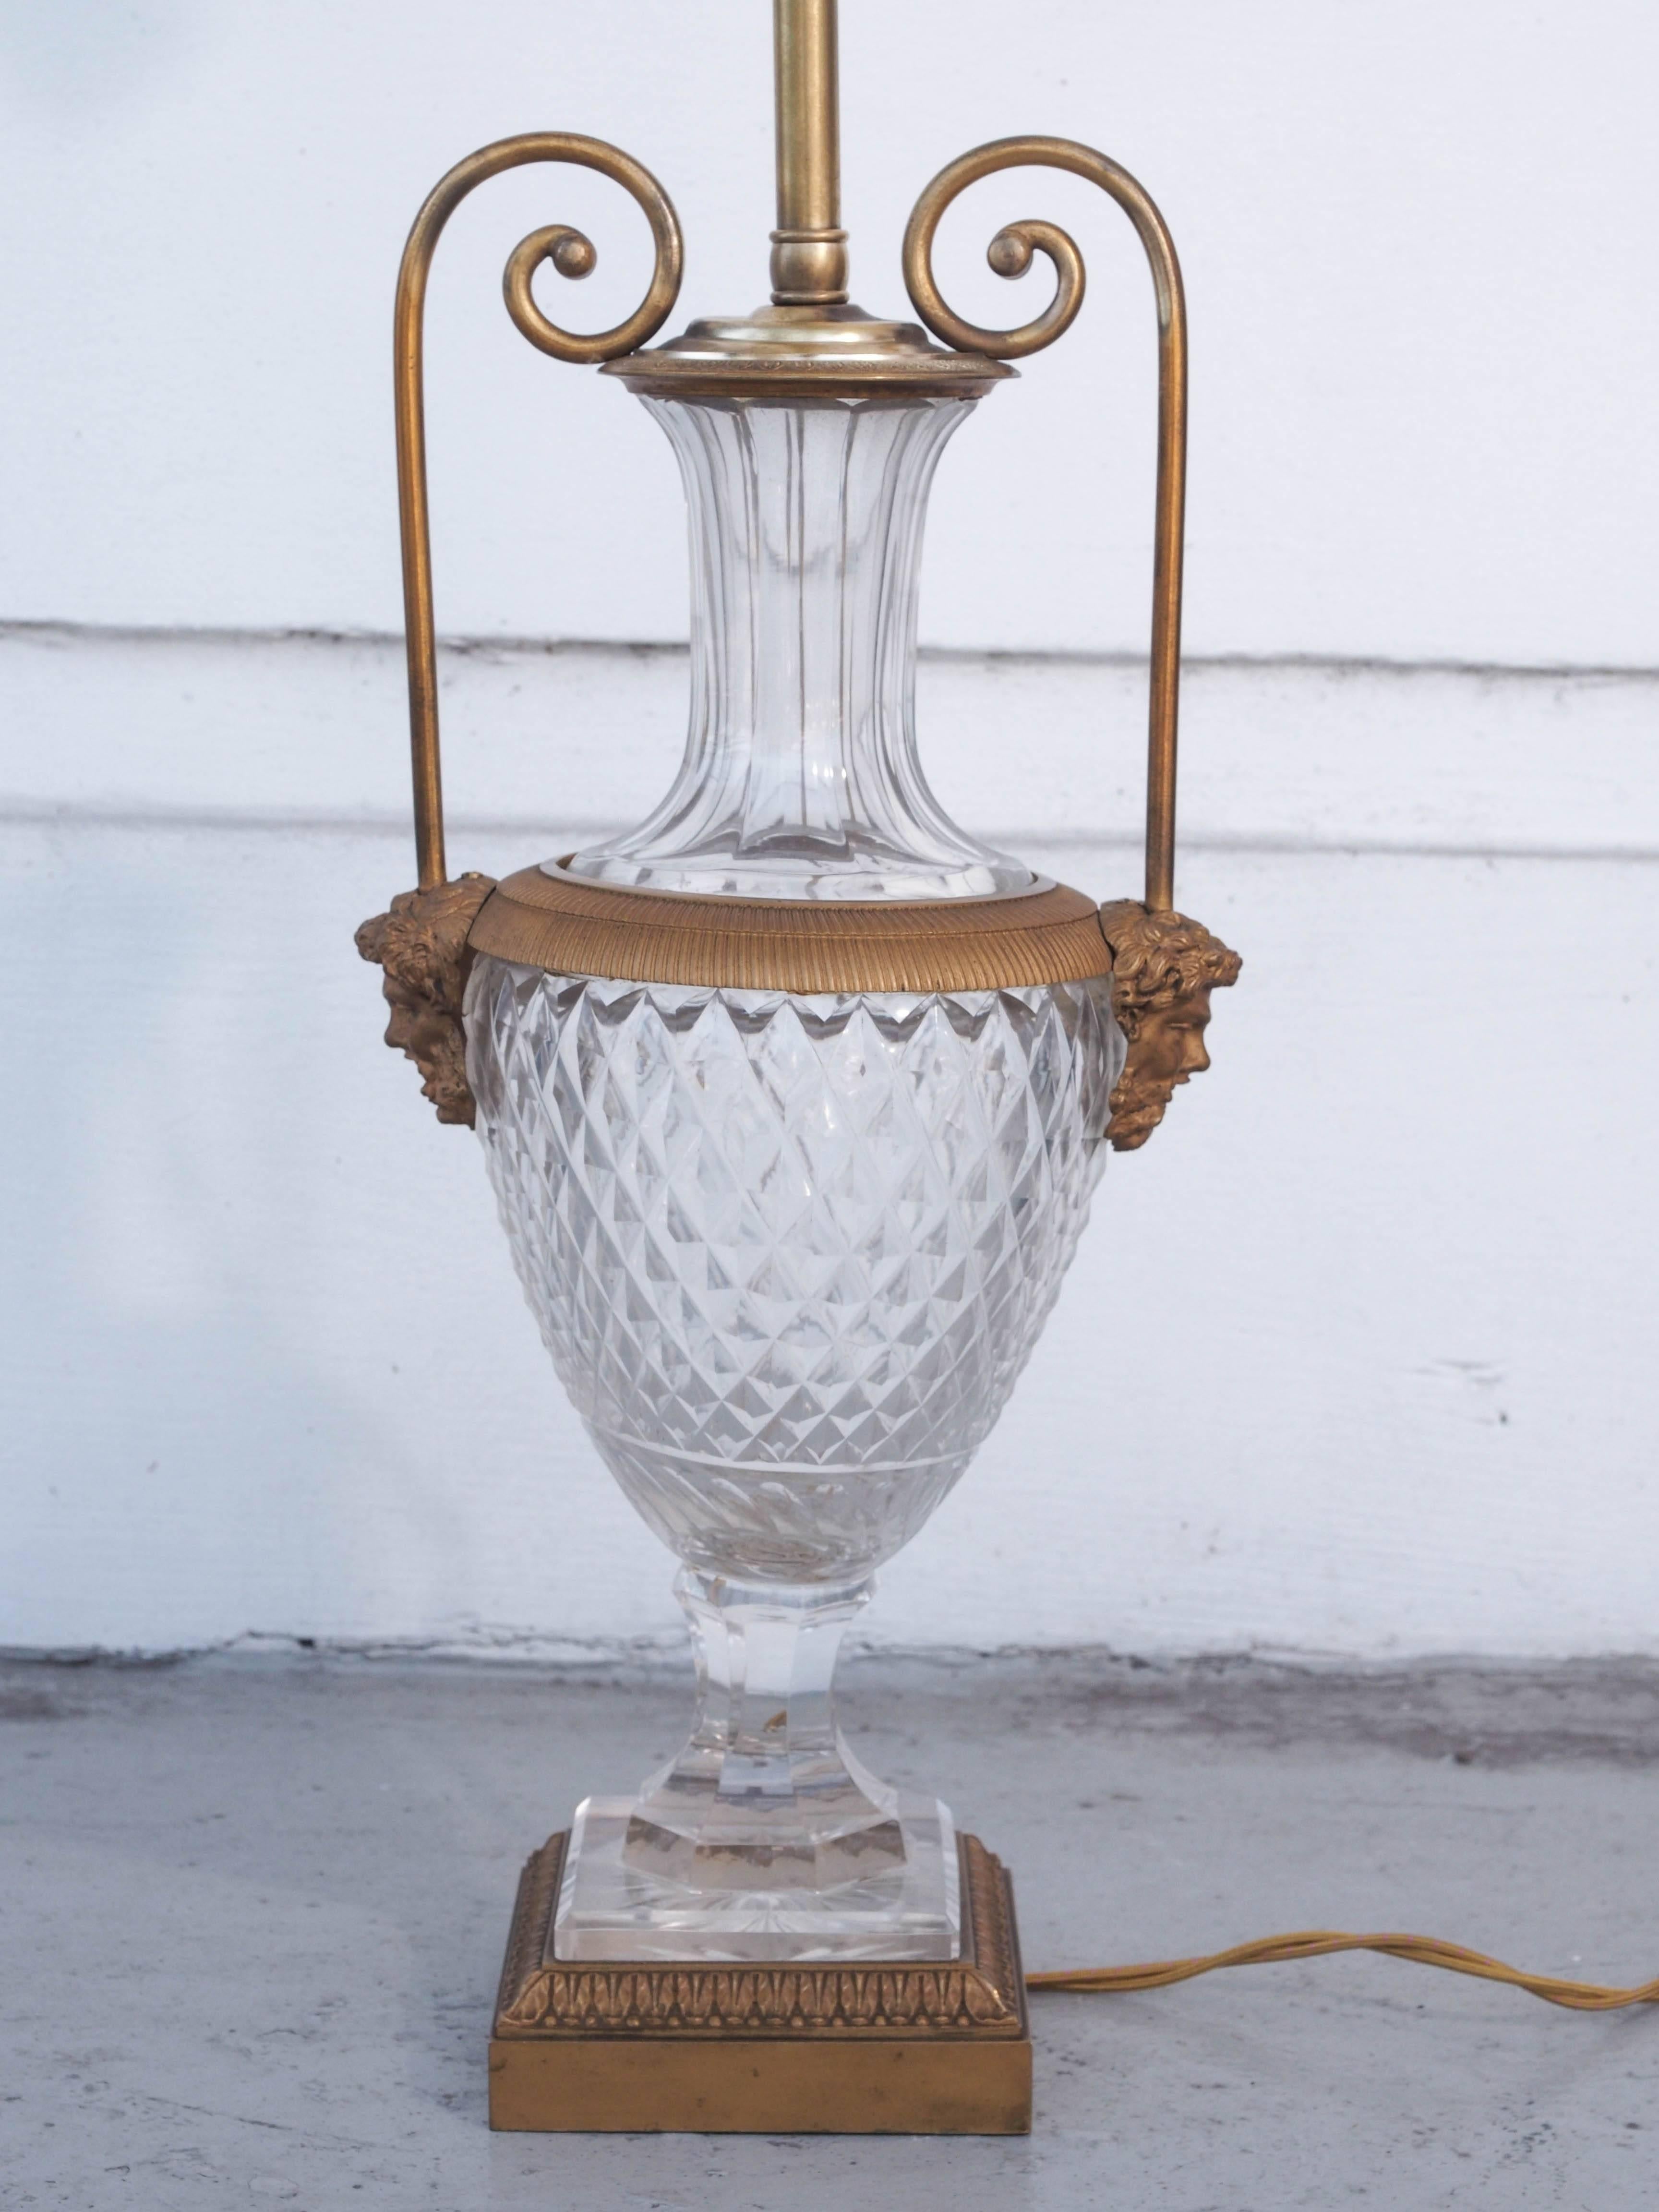 French 19th century gilt bronze mounted cut crystal vase now wired as a table lamp.